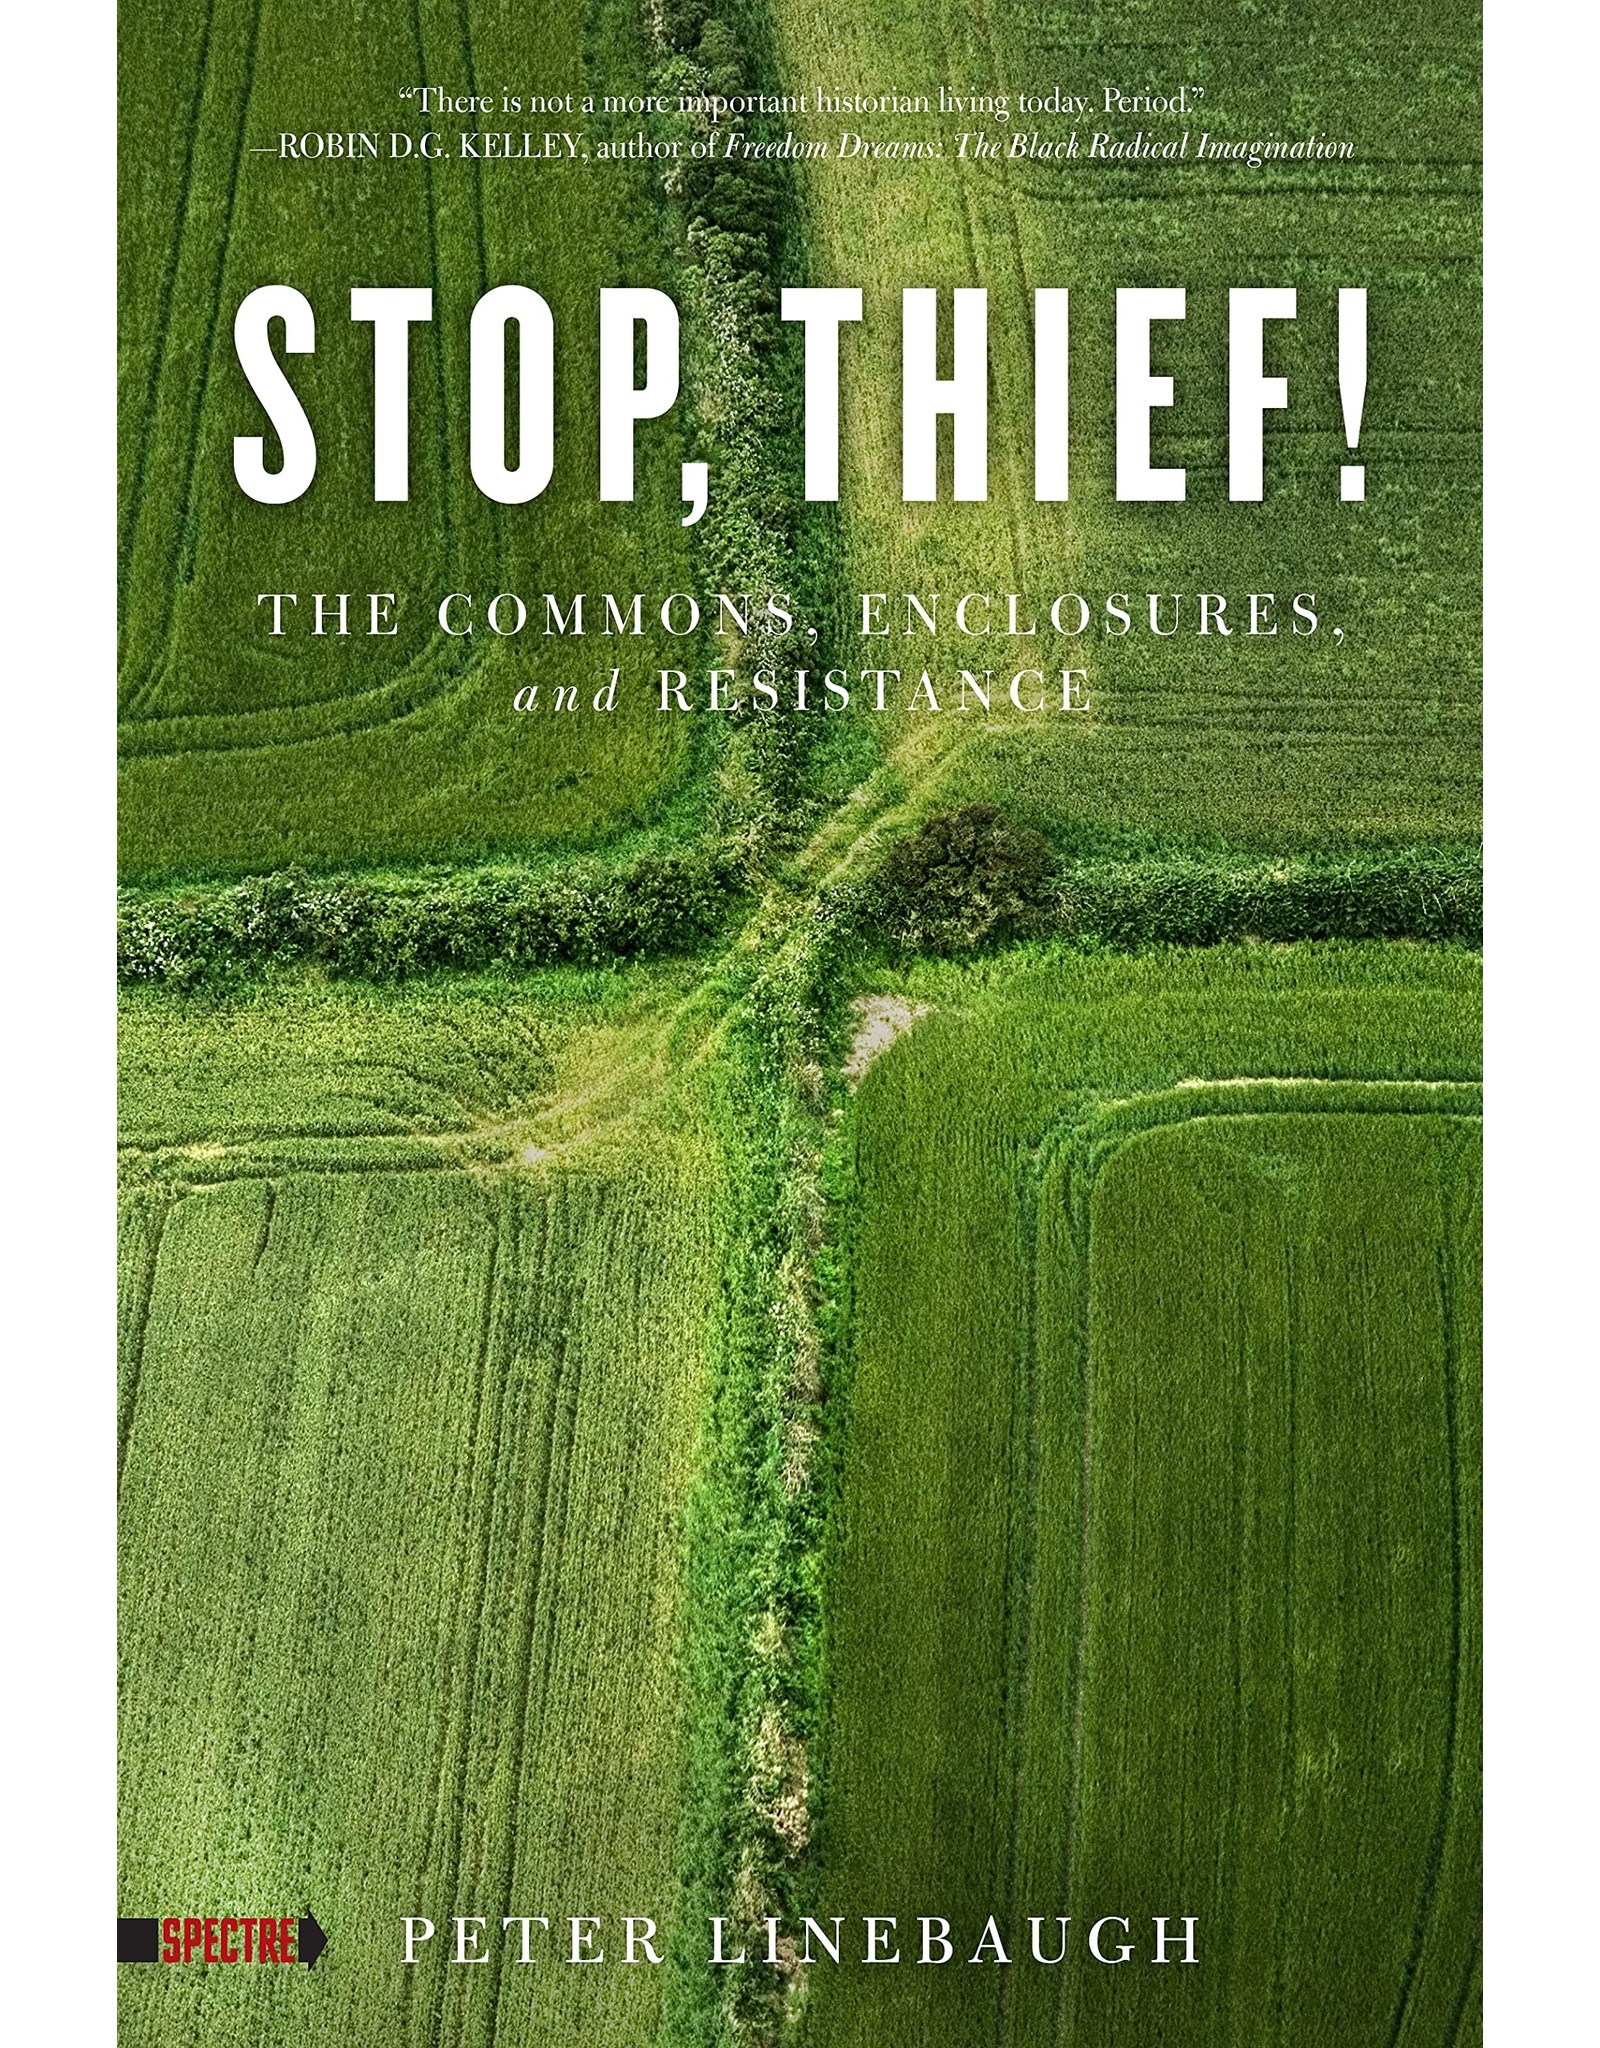 Literature Stop Thief! The Commons, Enclosures, and Resistance